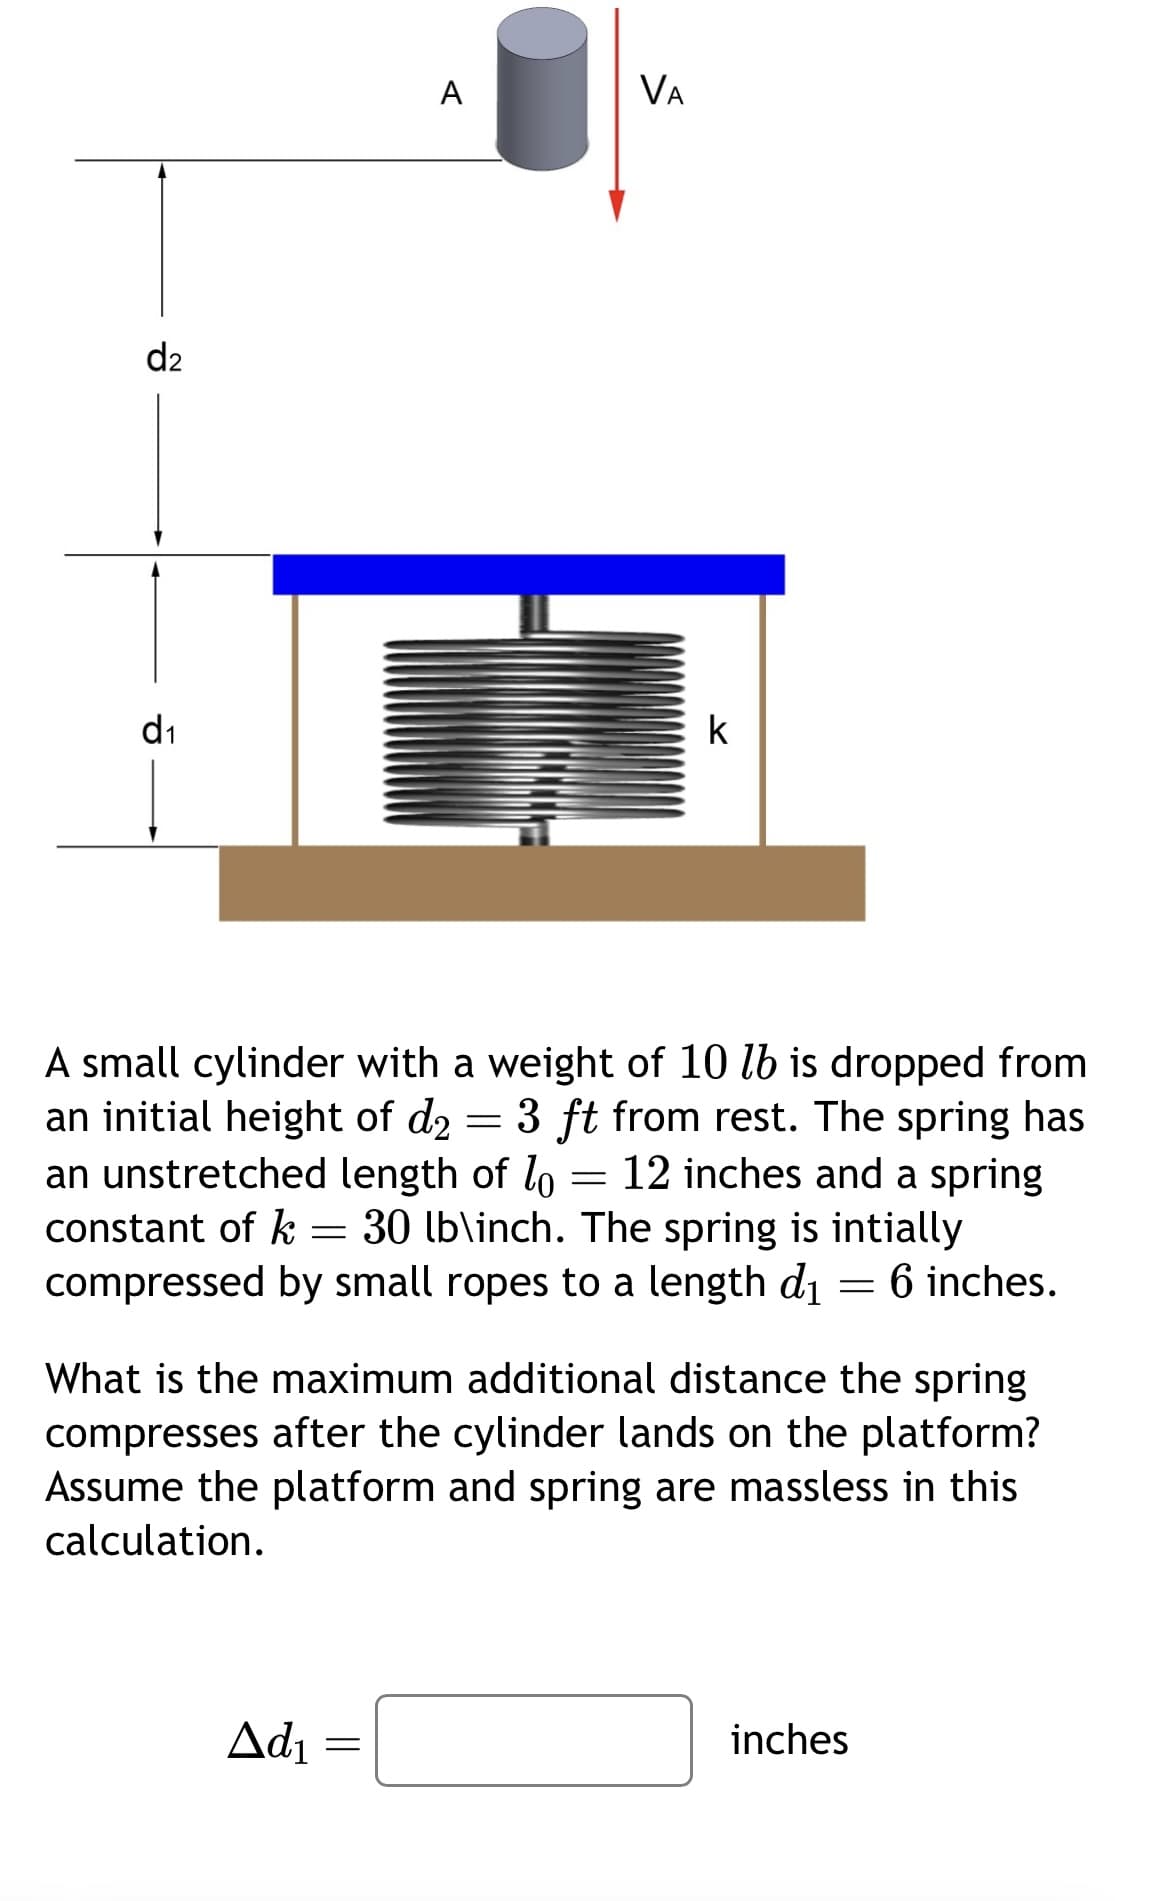 d2
d₁
A
Ad₁
VA
=
A small cylinder with a weight of 10 lb is dropped from
an initial height of d₂: 3 ft from rest. The spring has
an unstretched length of lo = 12 inches and a spring
constant of k = 30 lb\inch. The spring is intially
compressed by small ropes to a length d₁ = 6 inches.
=
k
What is the maximum additional distance the spring
compresses after the cylinder lands on the platform?
Assume the platform and spring are massless in this
calculation.
inches